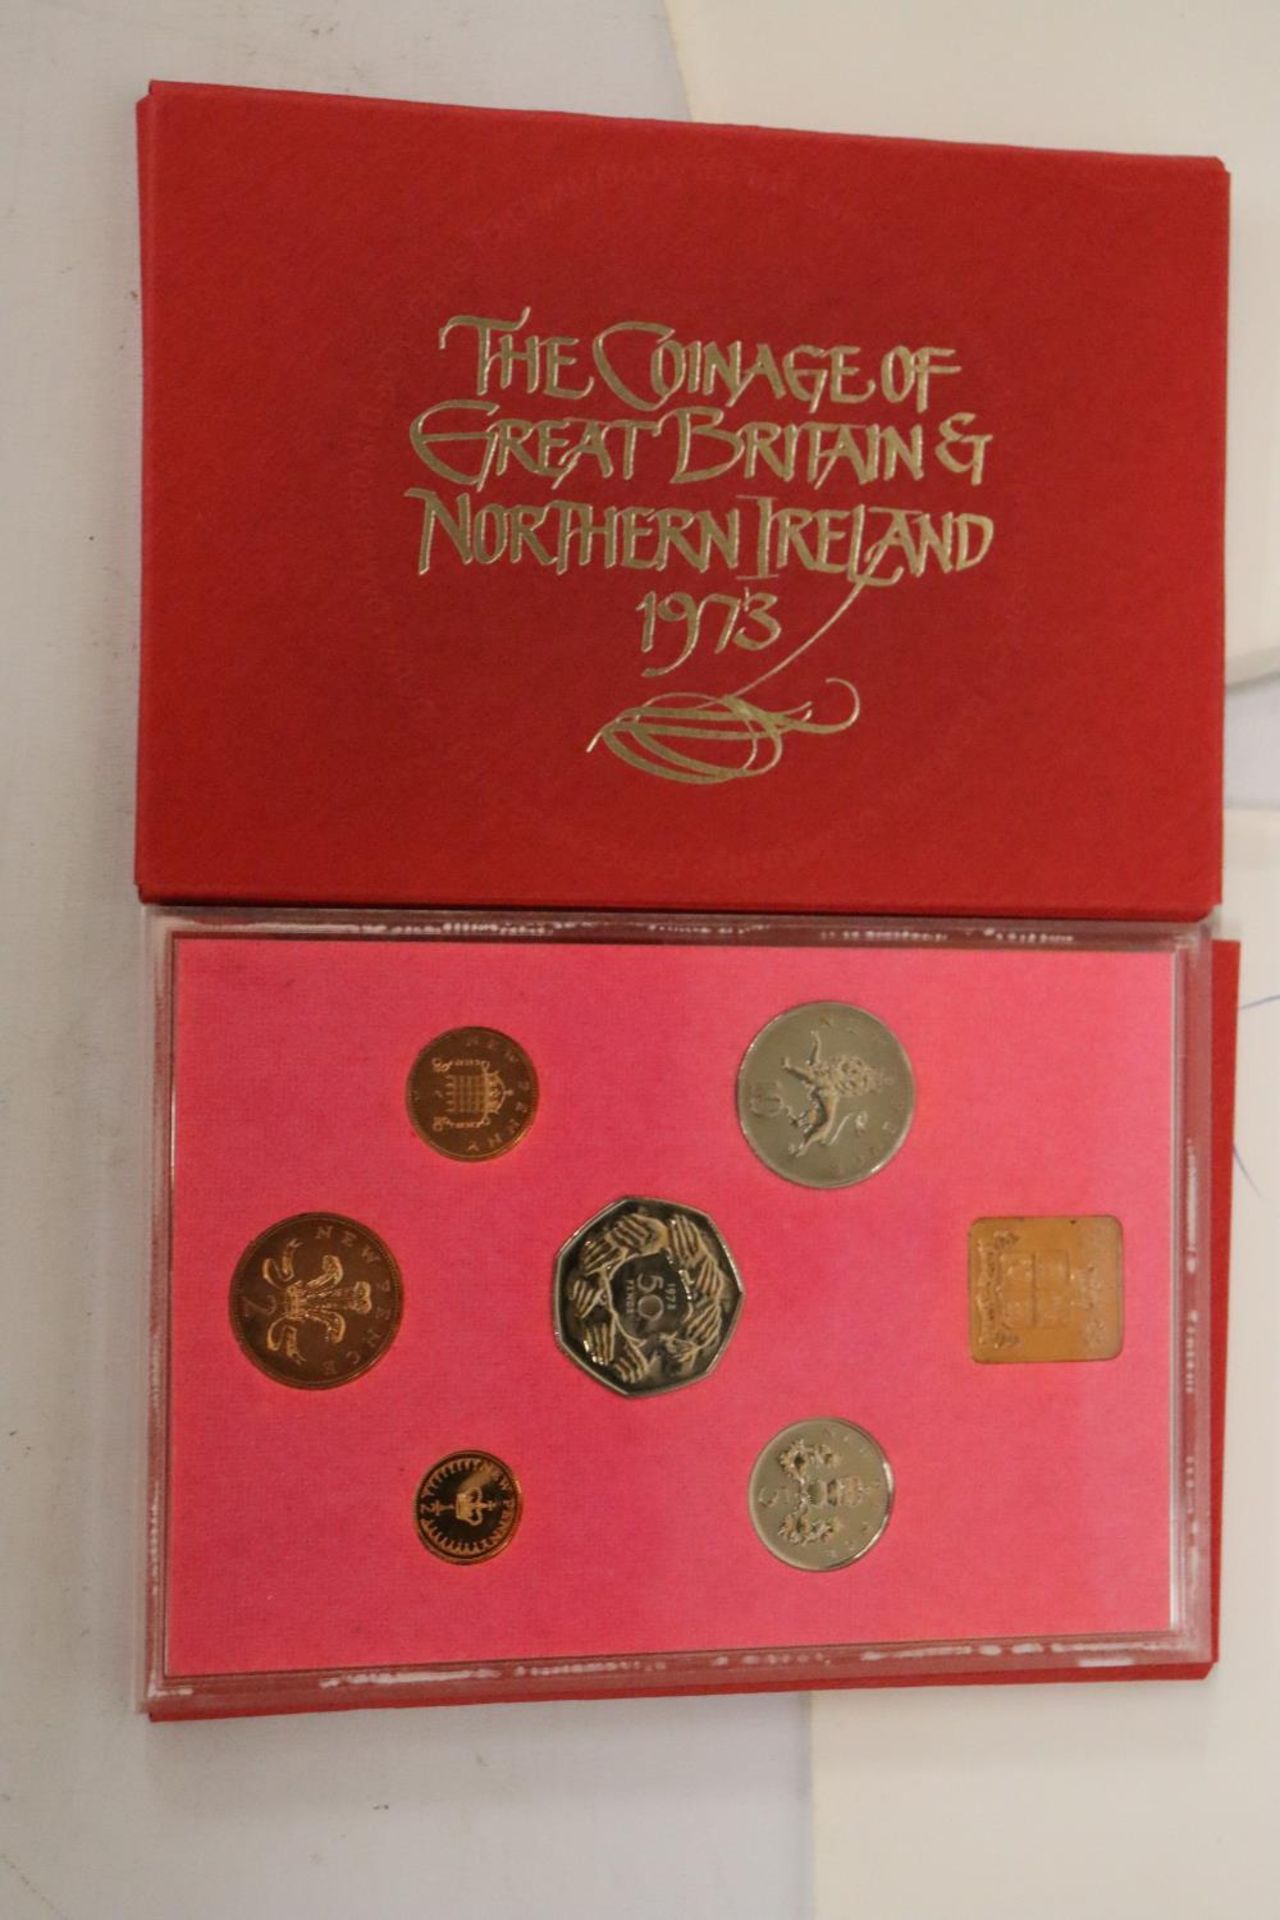 UK & NI , 2 X 1972, 2 X’73, 2 X ’74 AND 2 X ’75 YEAR PACKS OF COINS CONTAINED IN ENVELOPE - Image 4 of 5